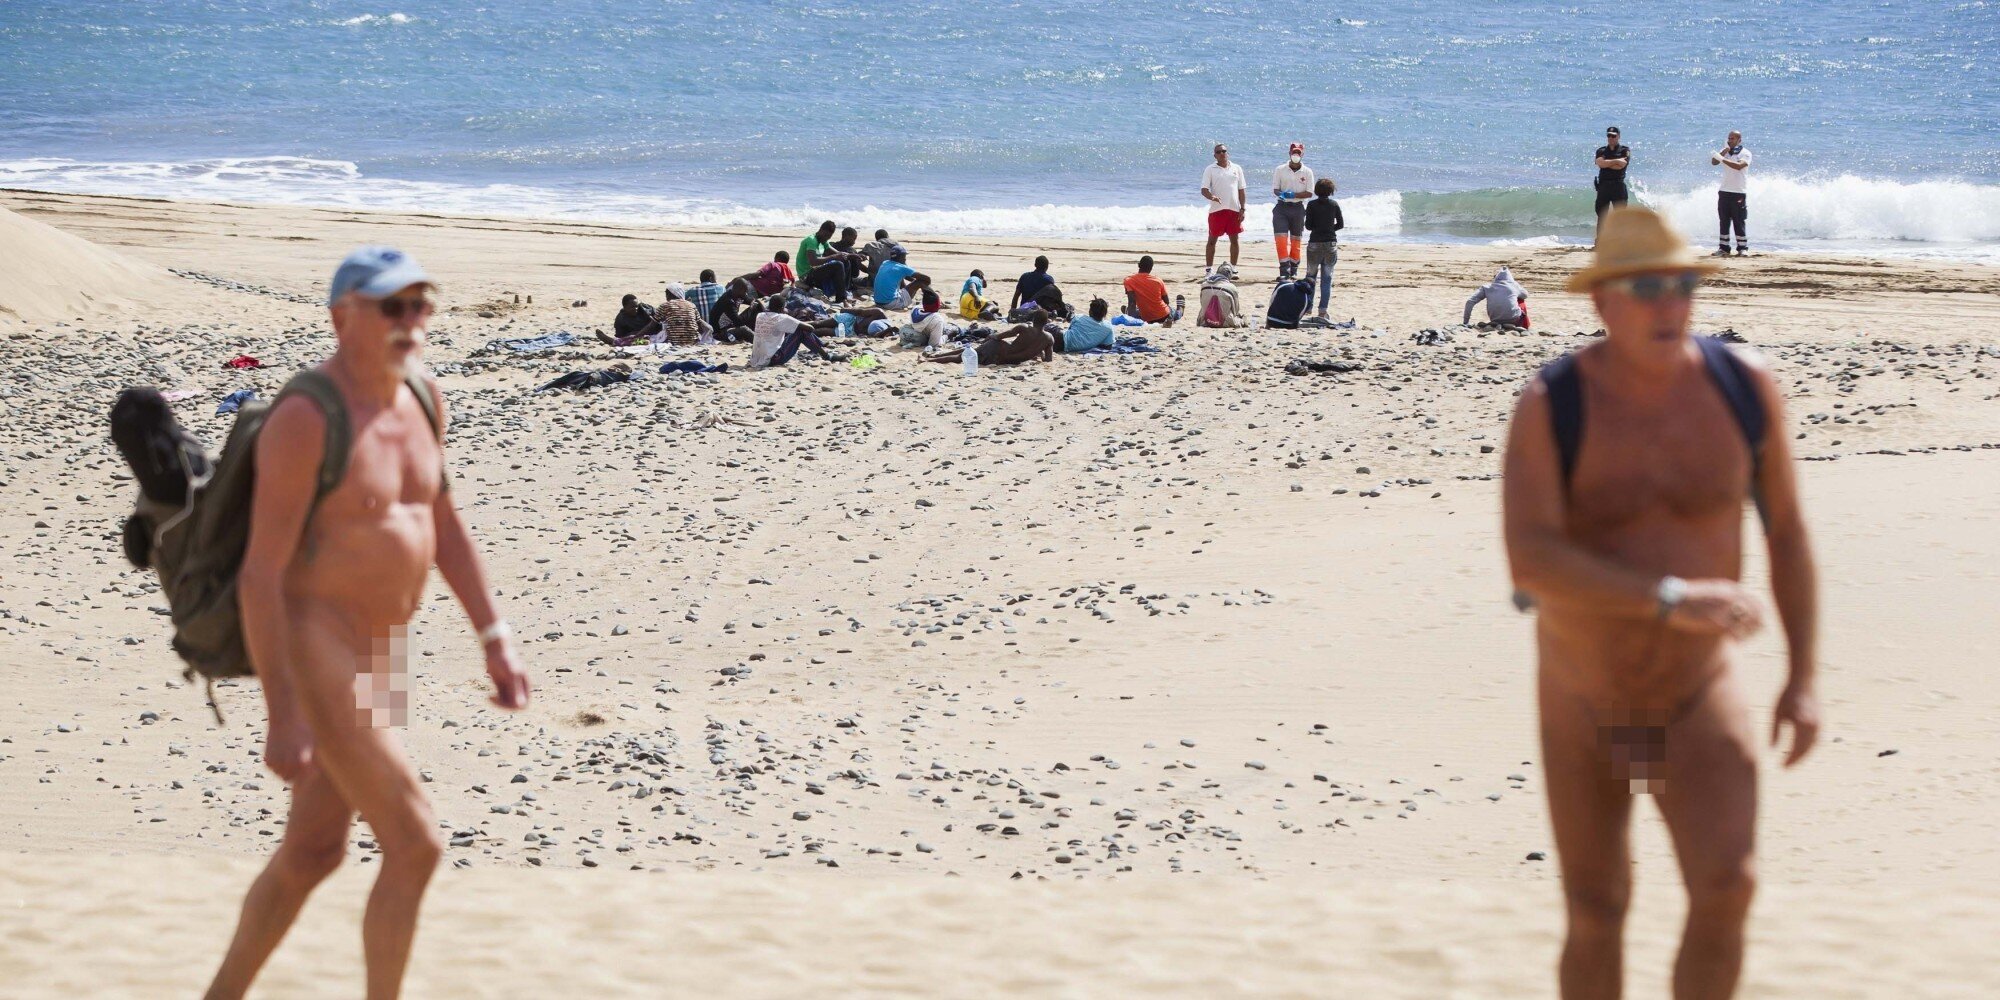 Boatful Of Migrants Wash Up On Gran Canaria Nudist Beach, Claim To Have Ebola HuffPost UK News